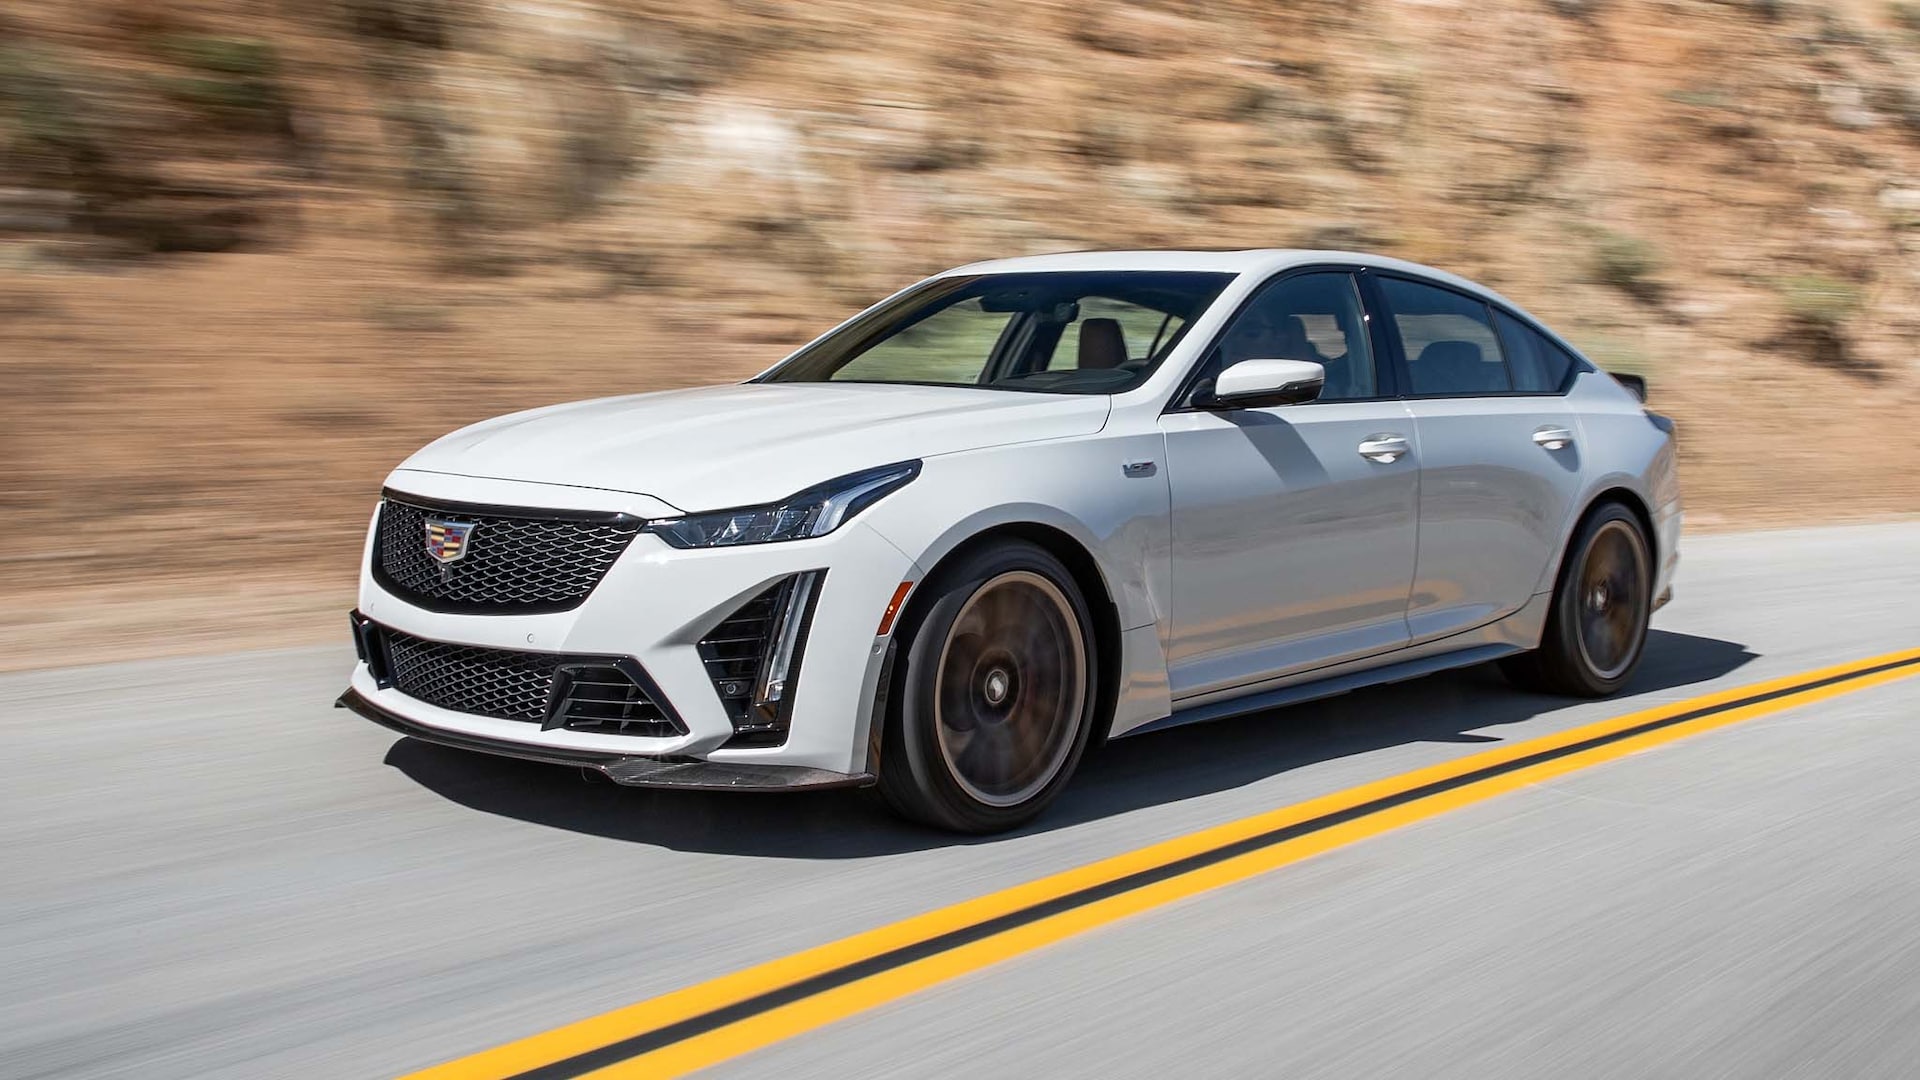 2023 Cadillac Cars: New Colors for CT4-V and CT5-V, Plus a Luxury EV